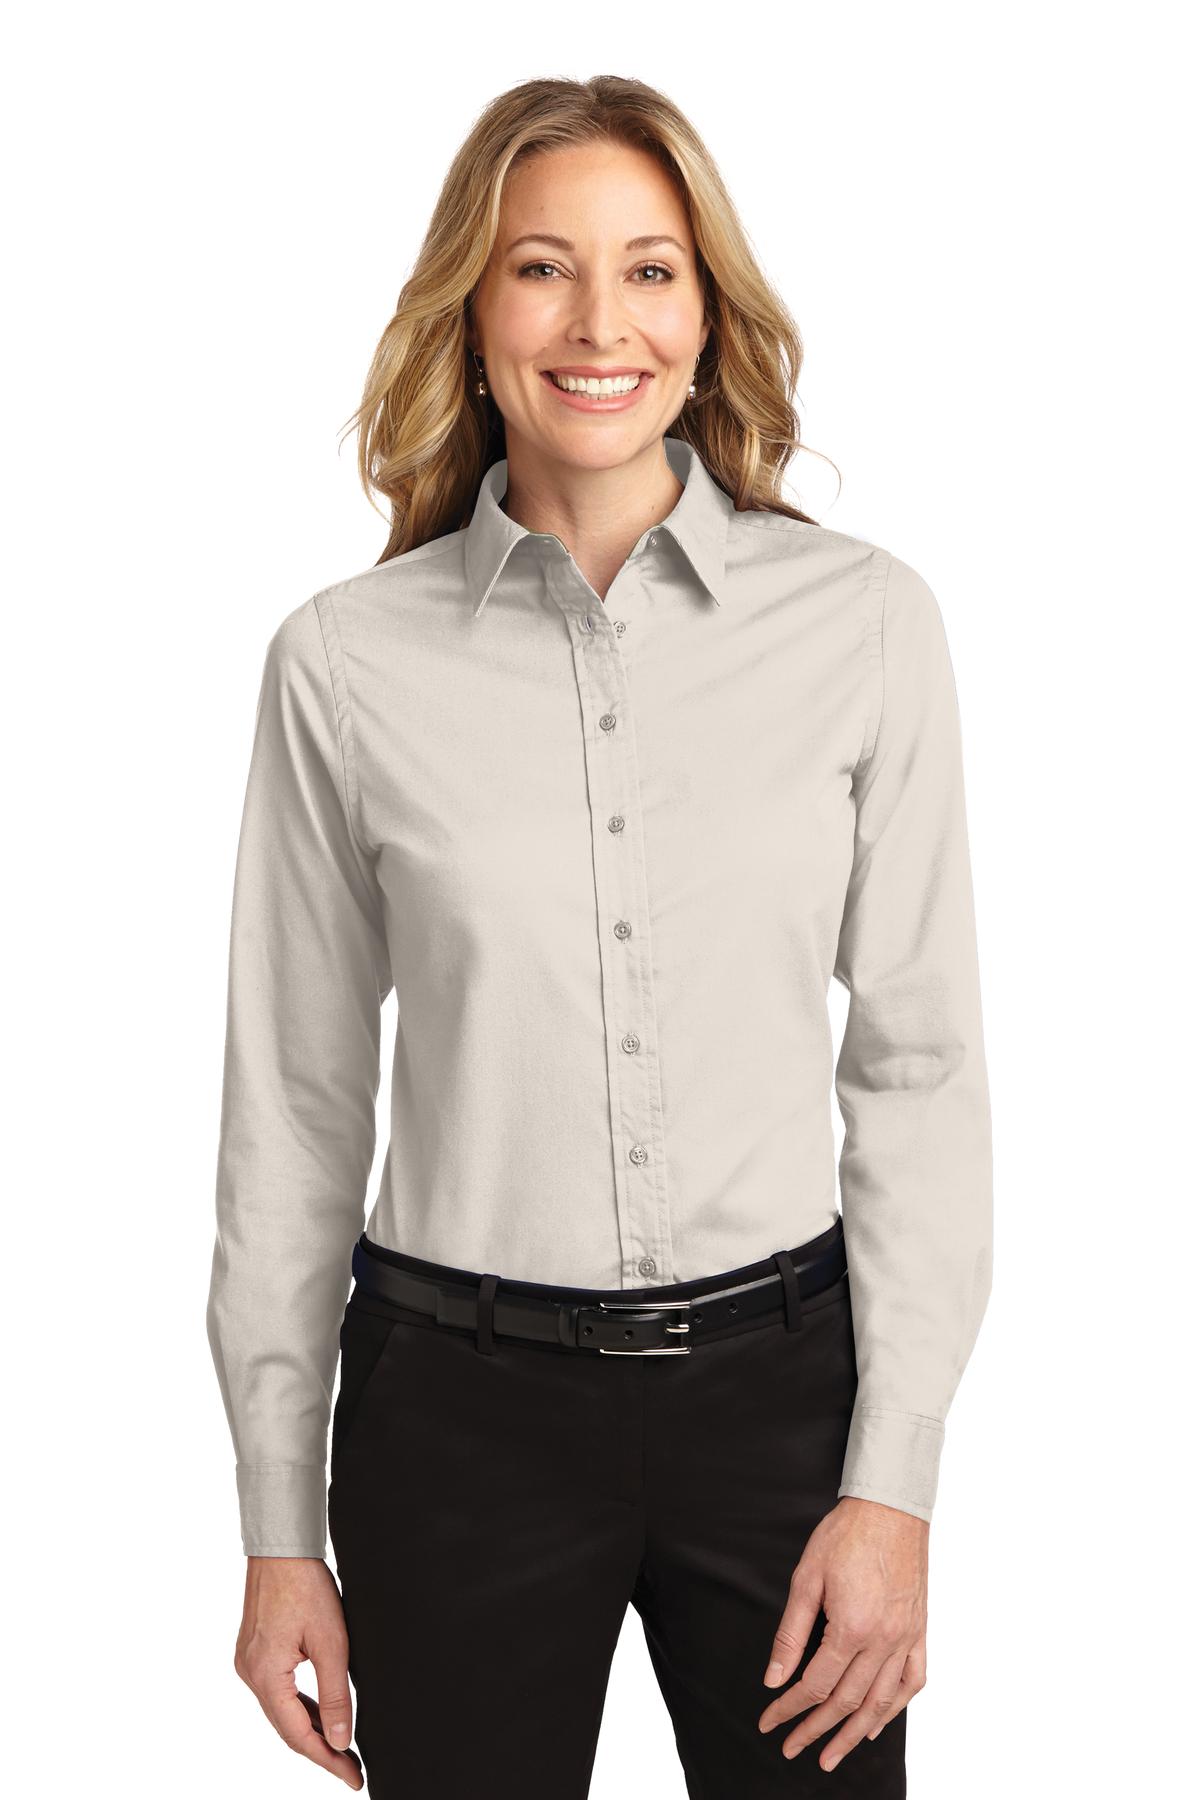 Port Authority ® Ladies Long Sleeve Easy Care Shirt. L608 - image 1 of 6